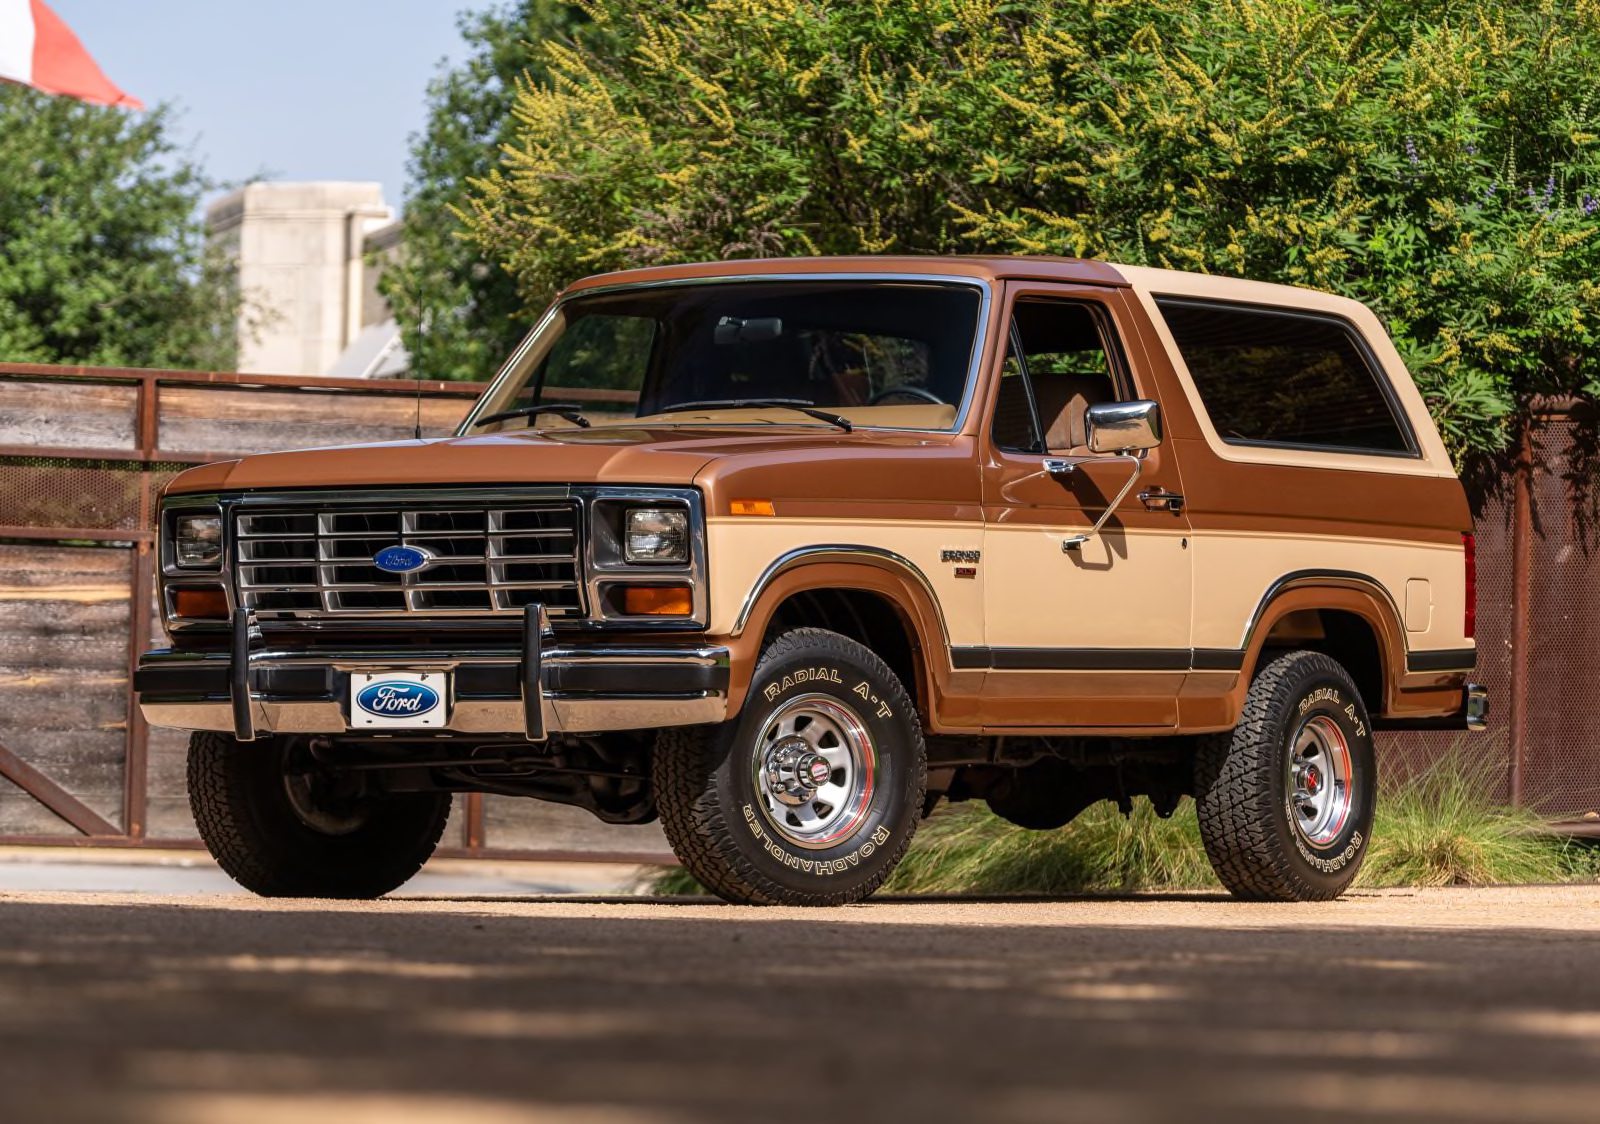  1986 “Bullnose” Ford Bronco XLT in two-tone brown and chestnut